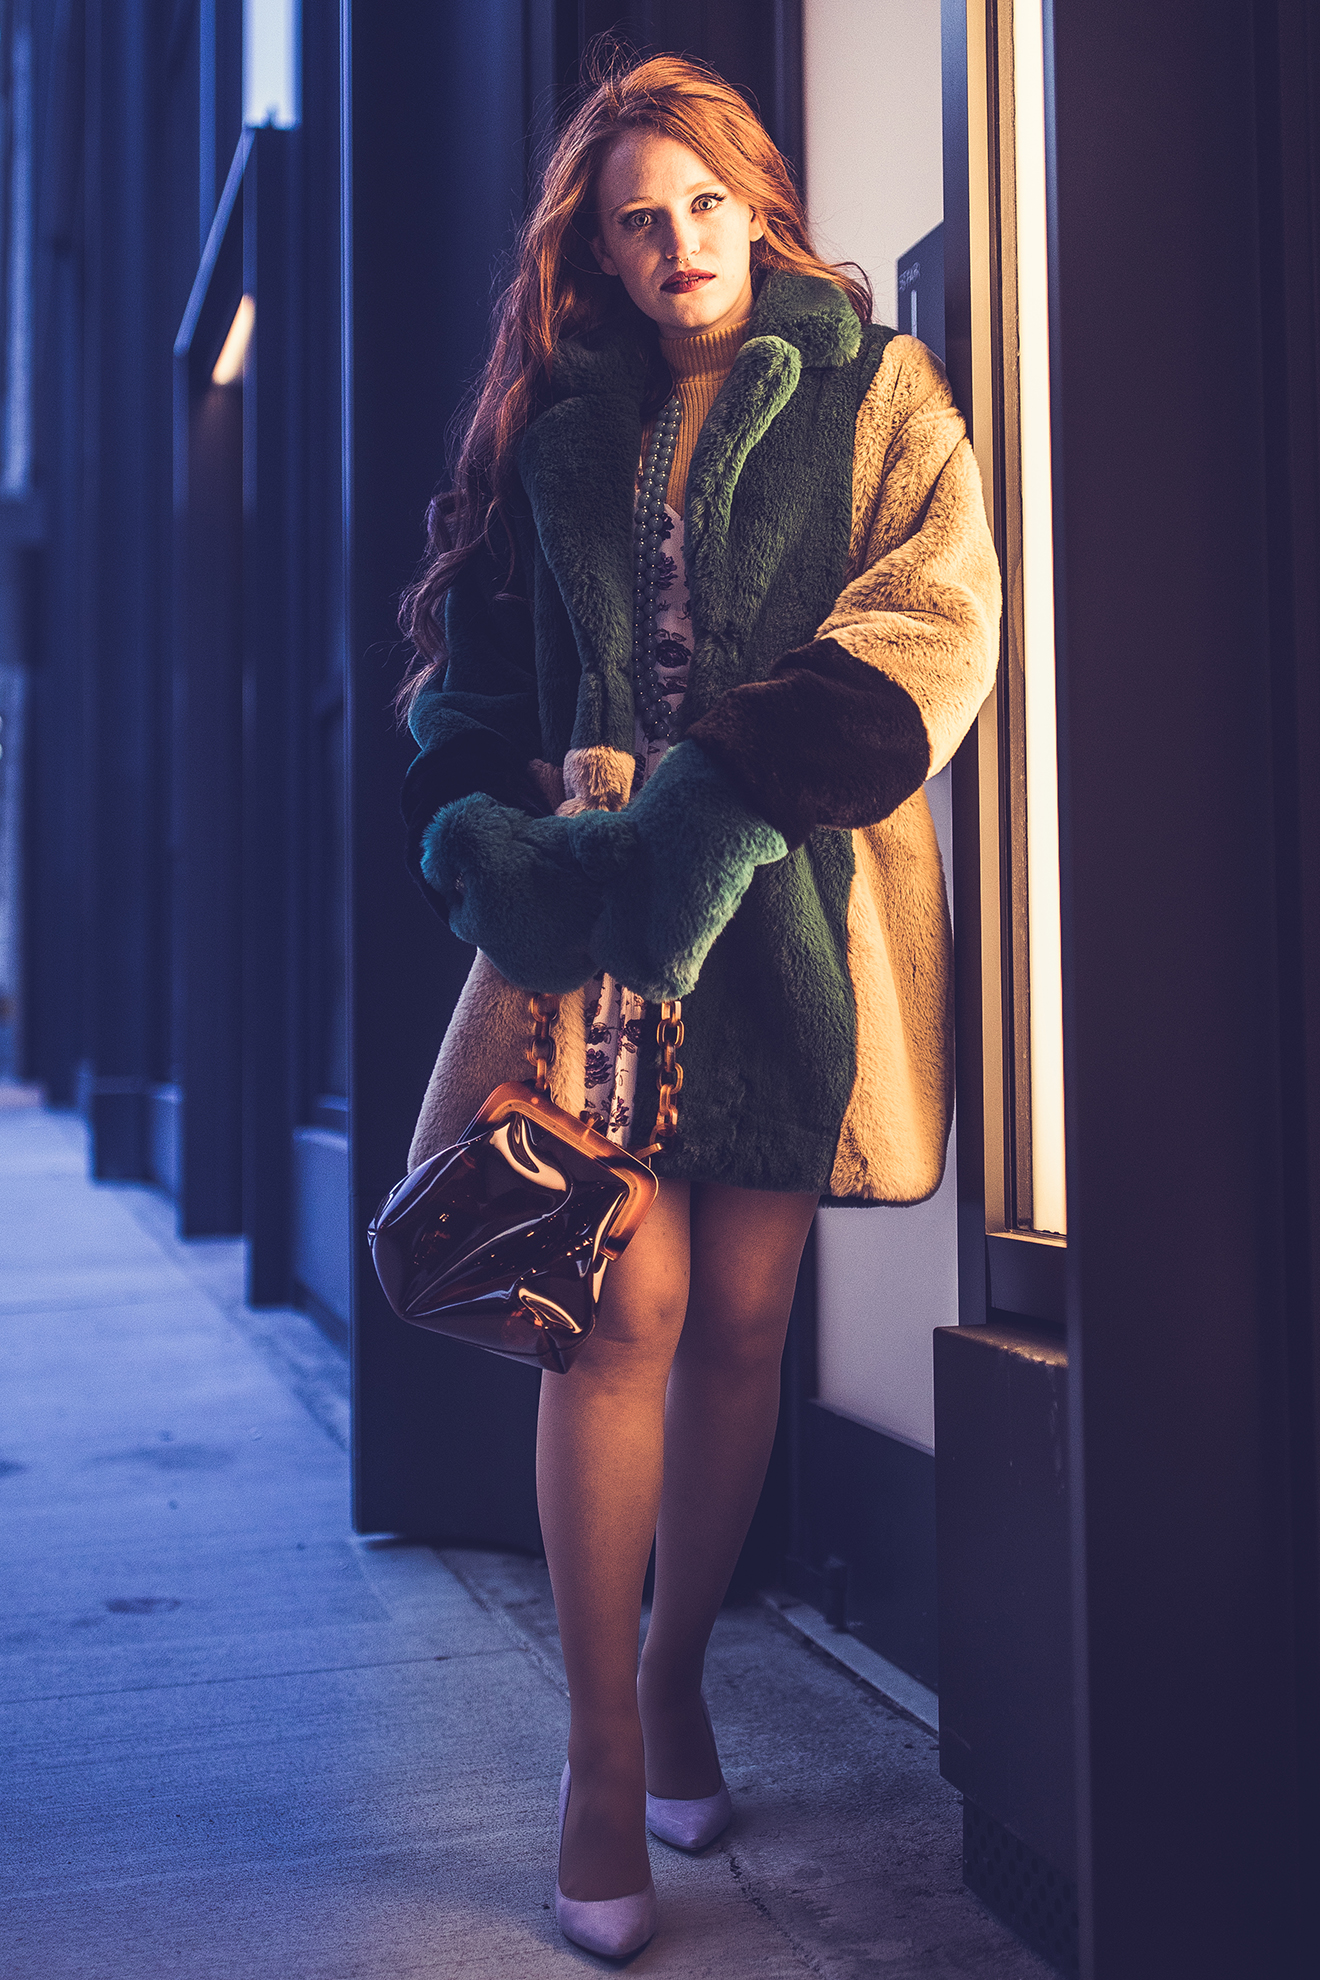 Nighttime shot of red-haired model in a green and beige fur jacket stanidng beside an illuminated shop window